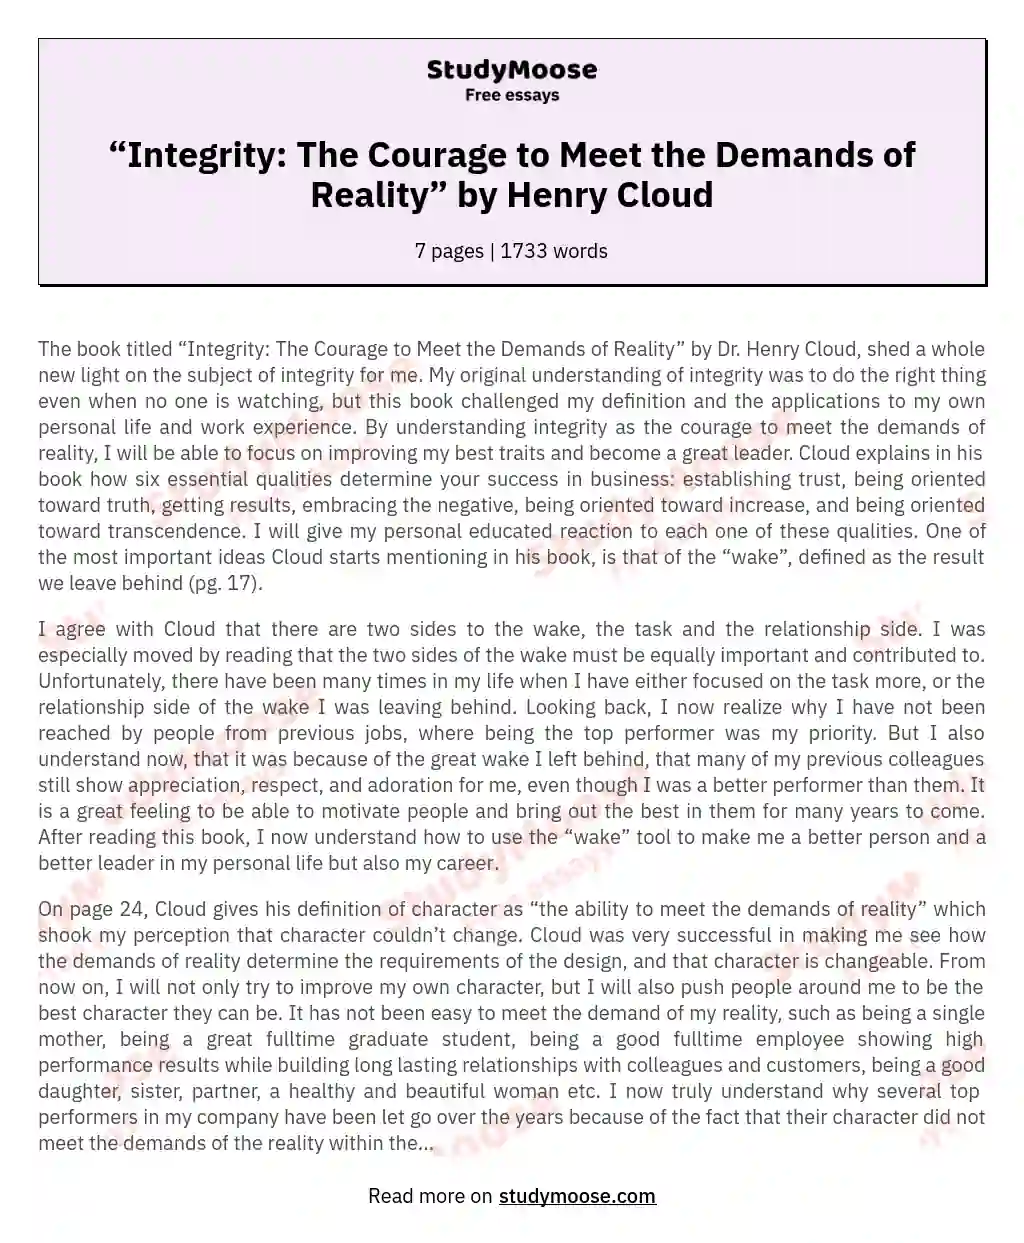 “Integrity: The Courage to Meet the Demands of Reality” by Henry Cloud essay